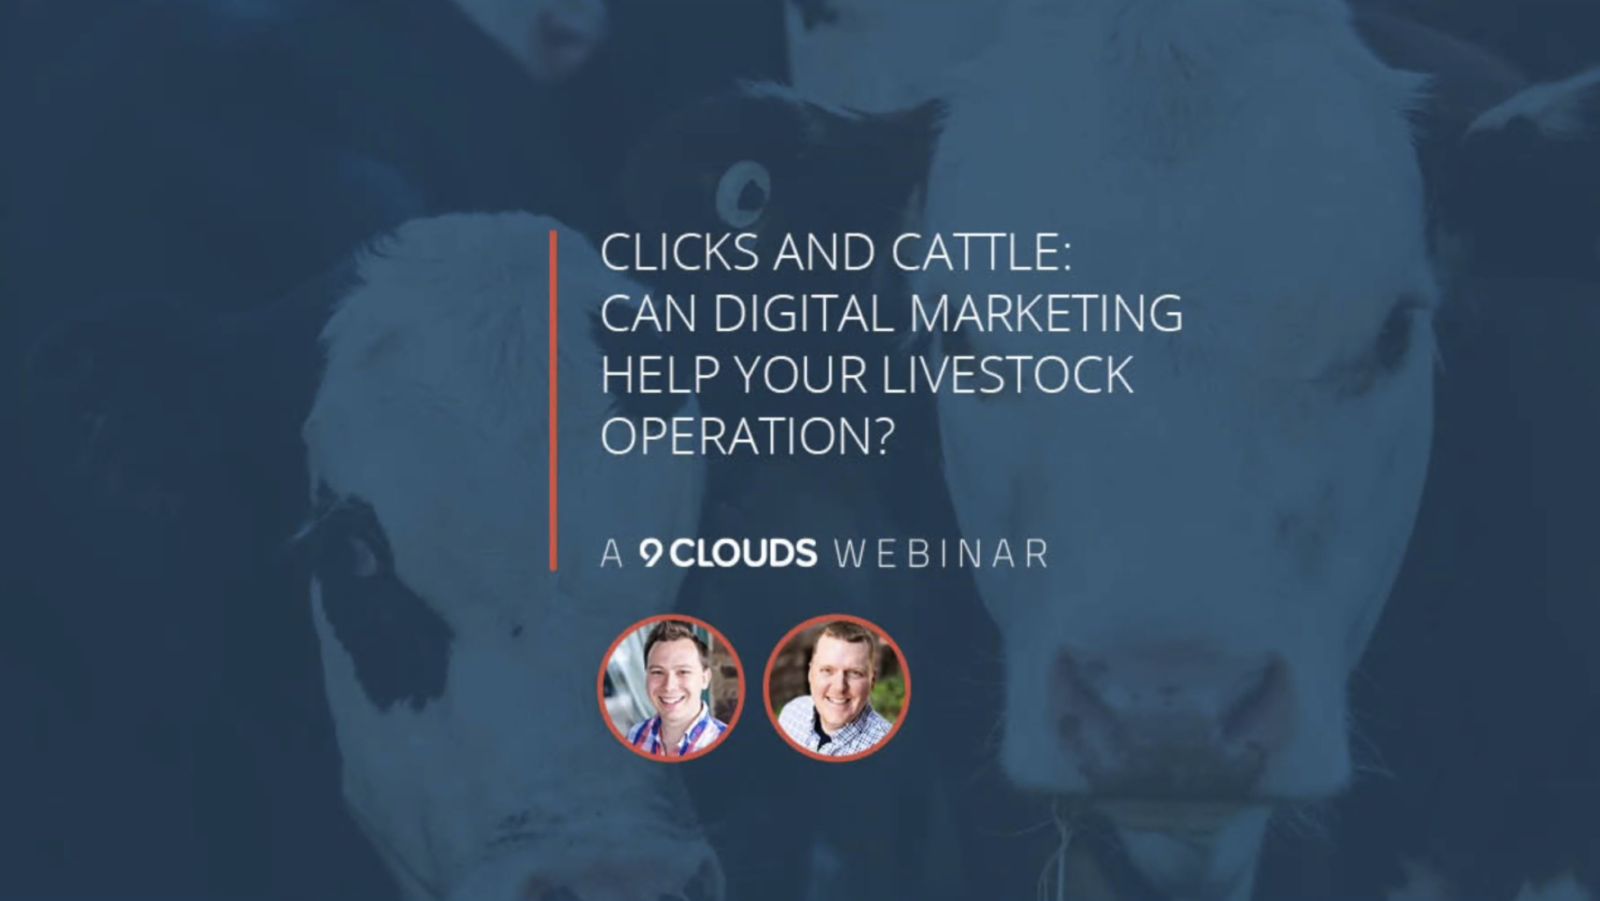 [Webinar] Clicks and Cattle: Would Digital Marketing Help Your Livestock Operation?